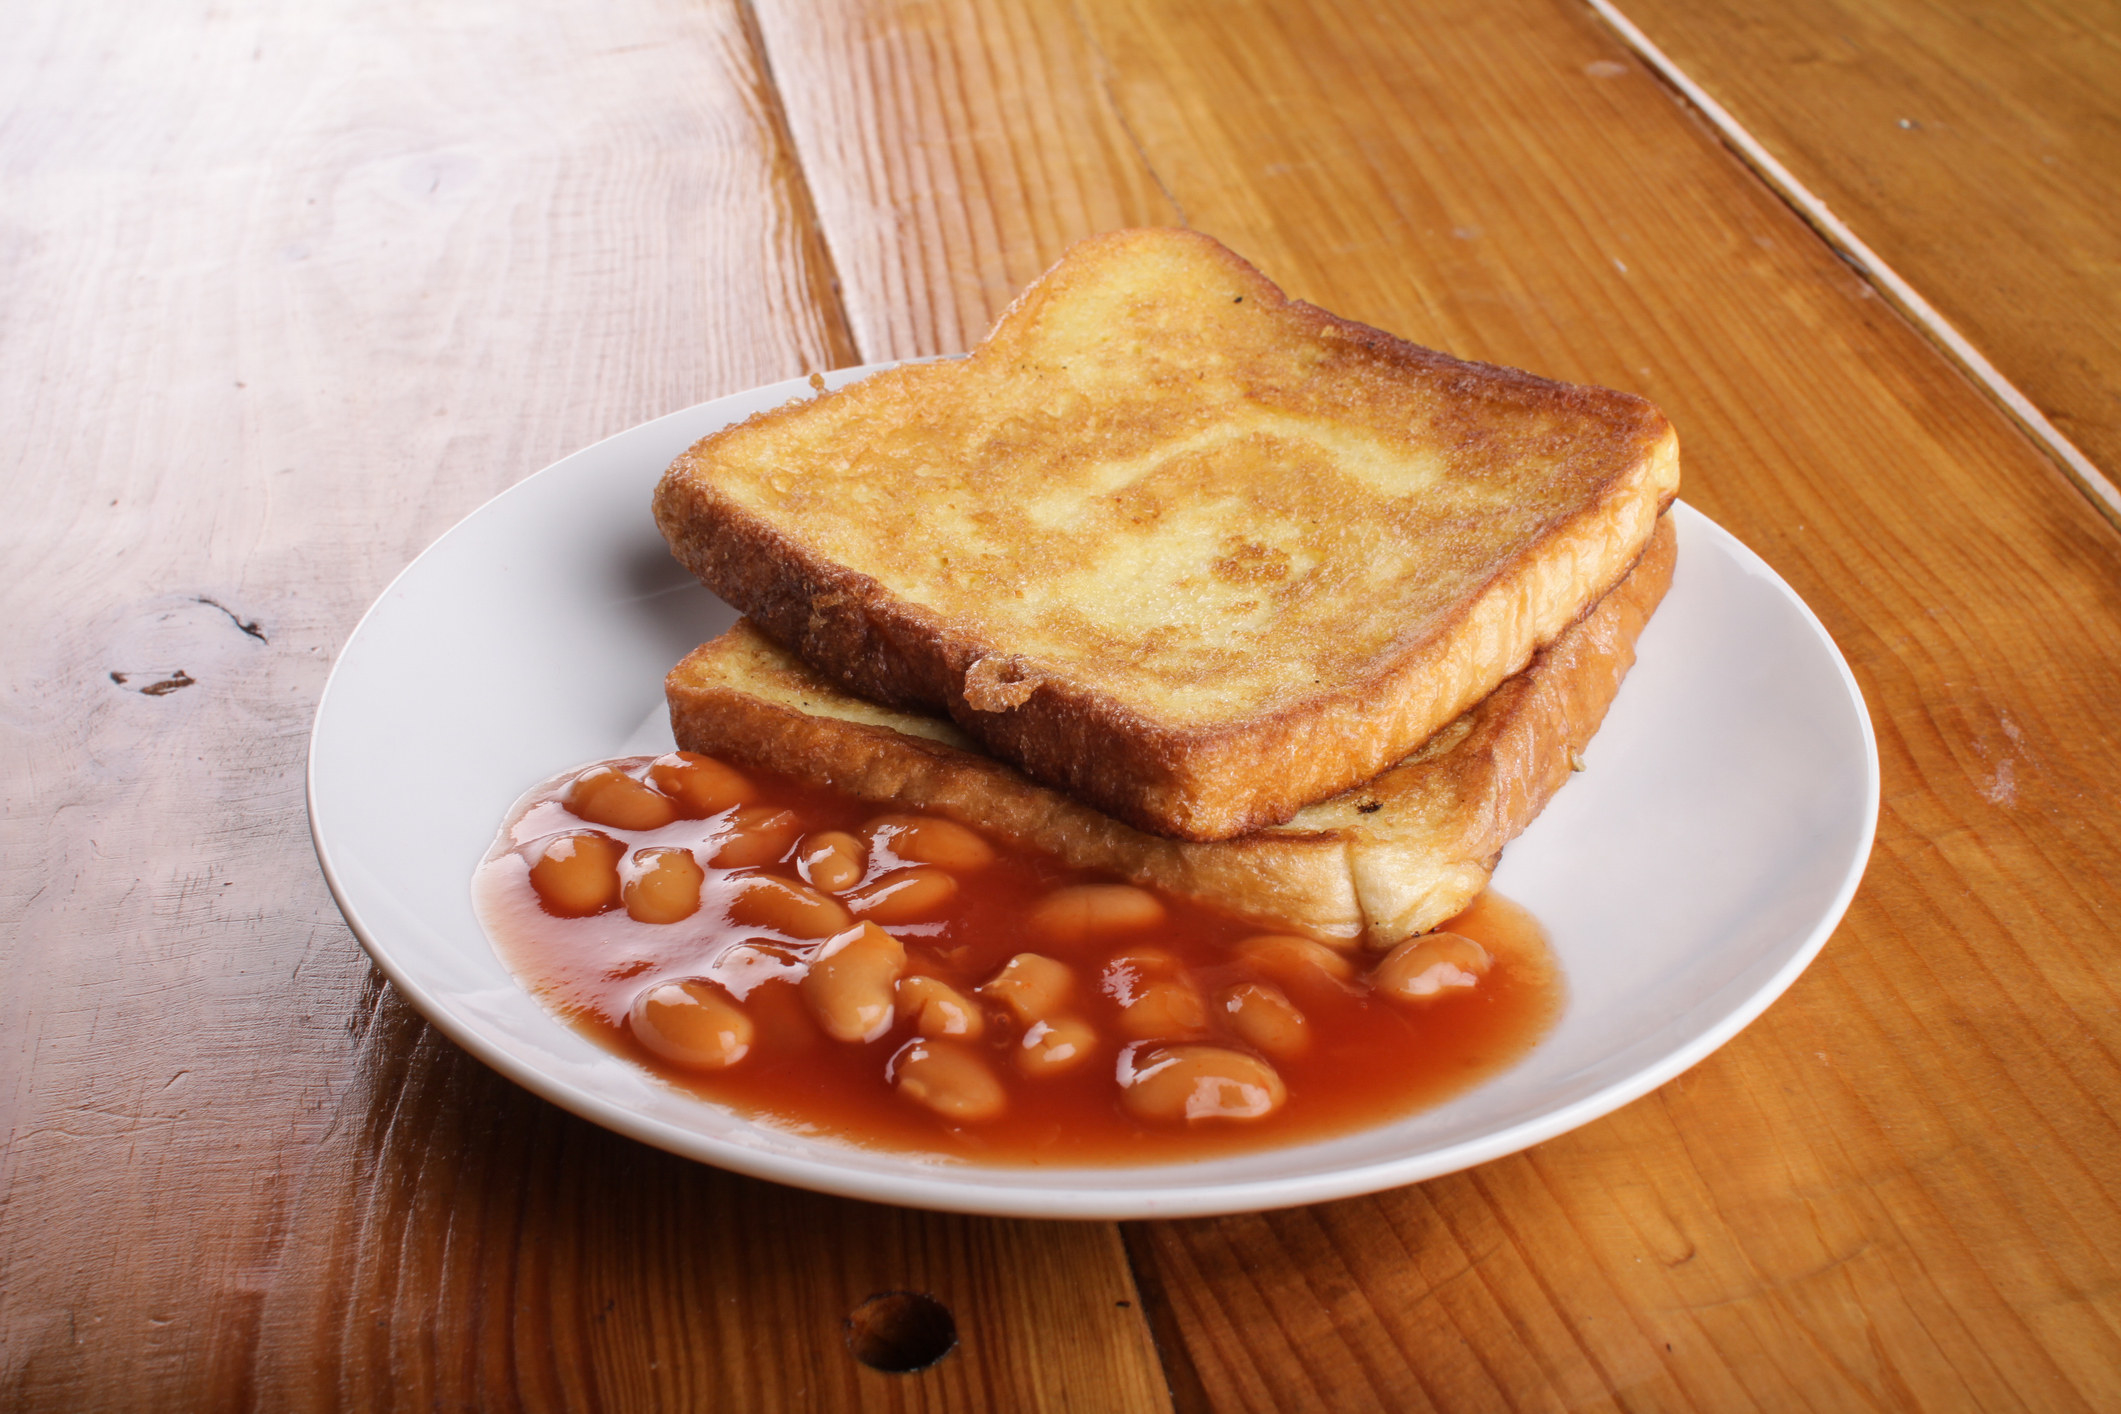 Baked beans and toast.